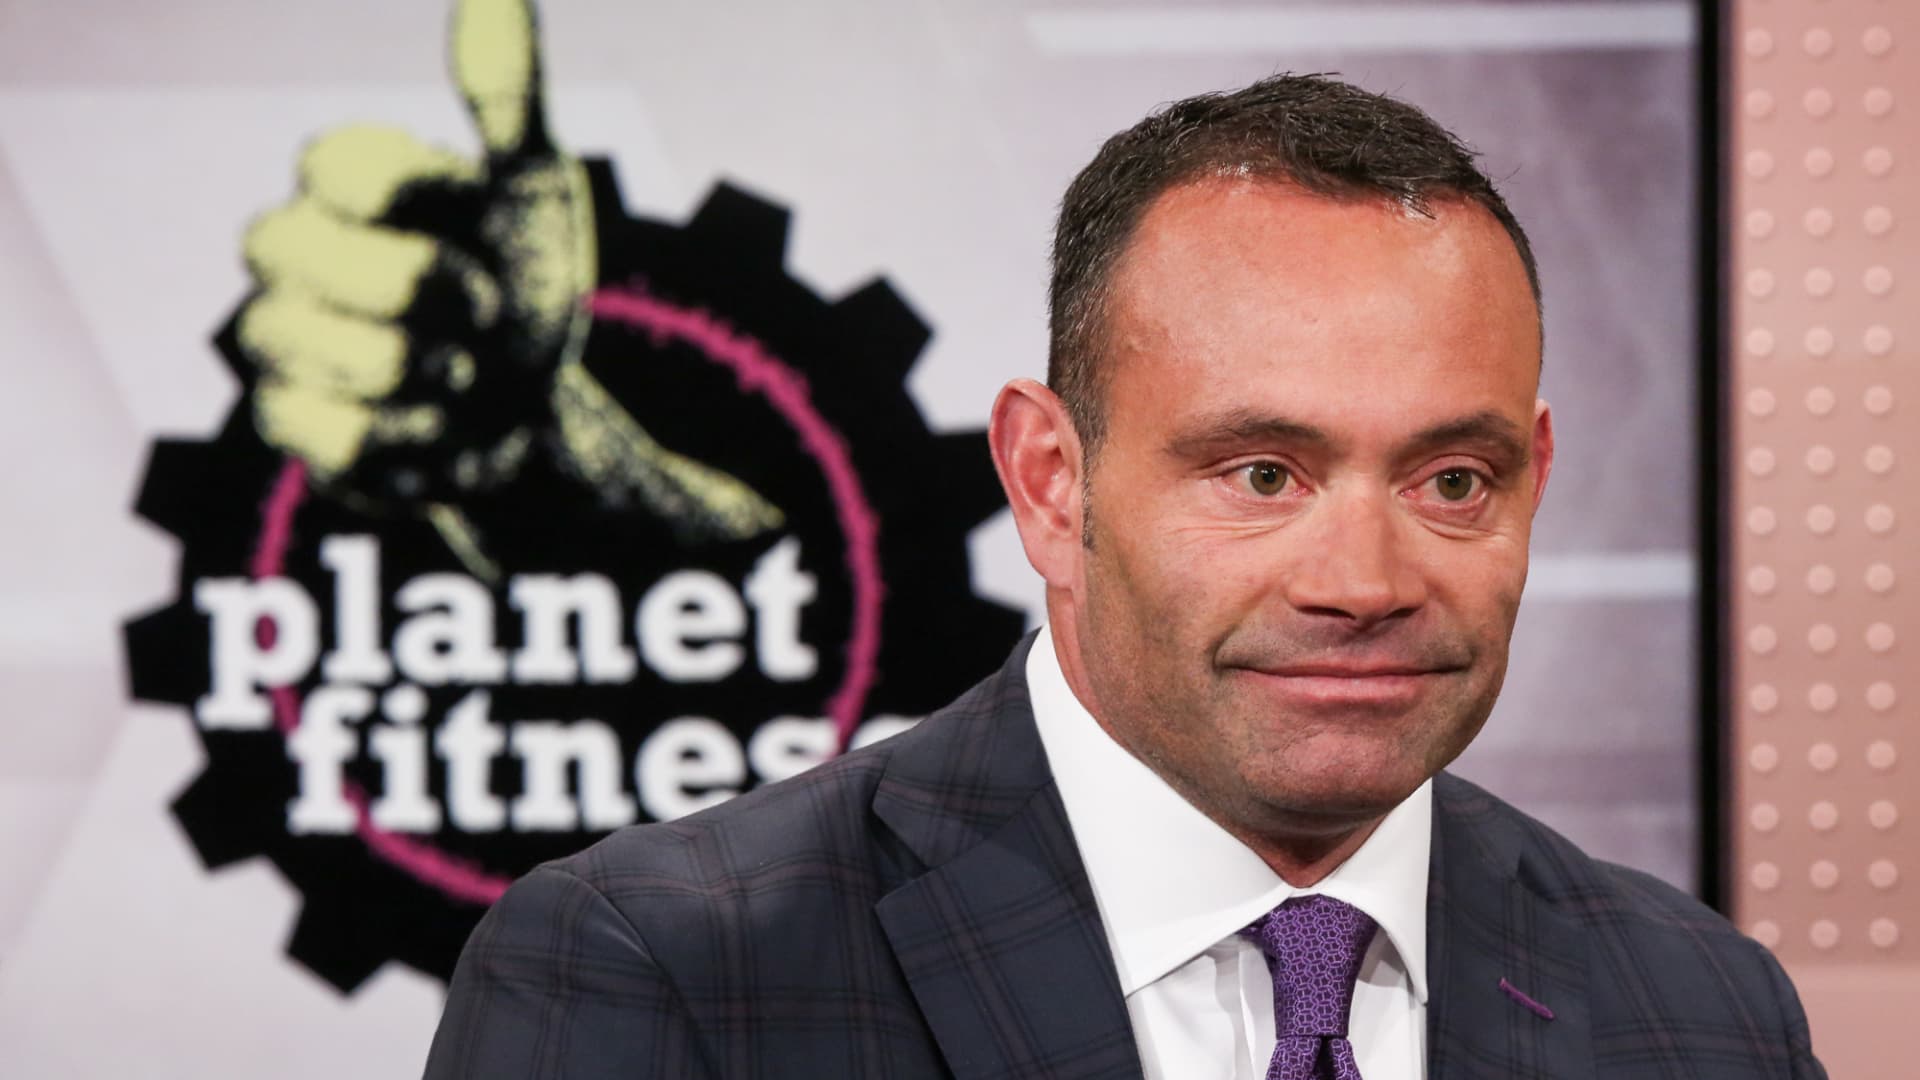 Planet Fitness shares sink 15% after board ousts CEO in shocking move